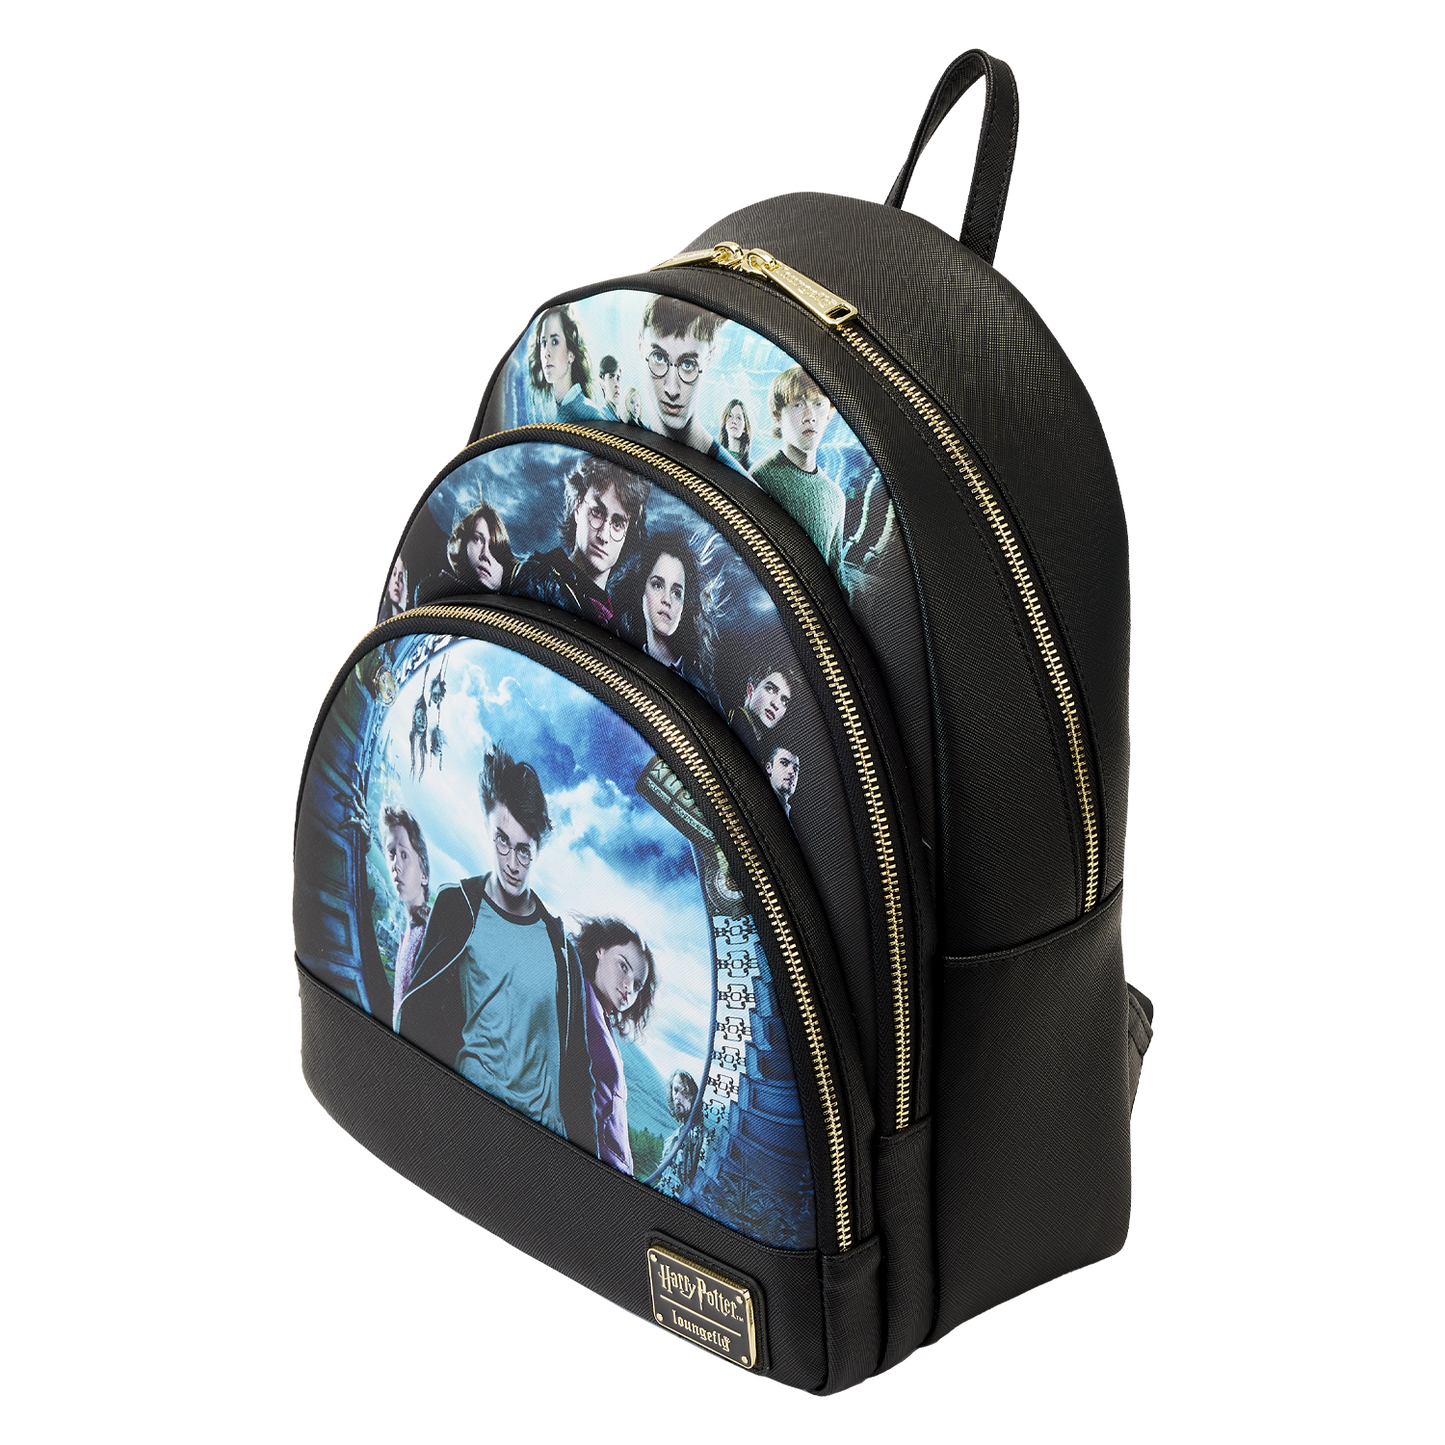 Loungefly x Harry Potter Trilogy Series 2 Triple Pocket Mini Backpack